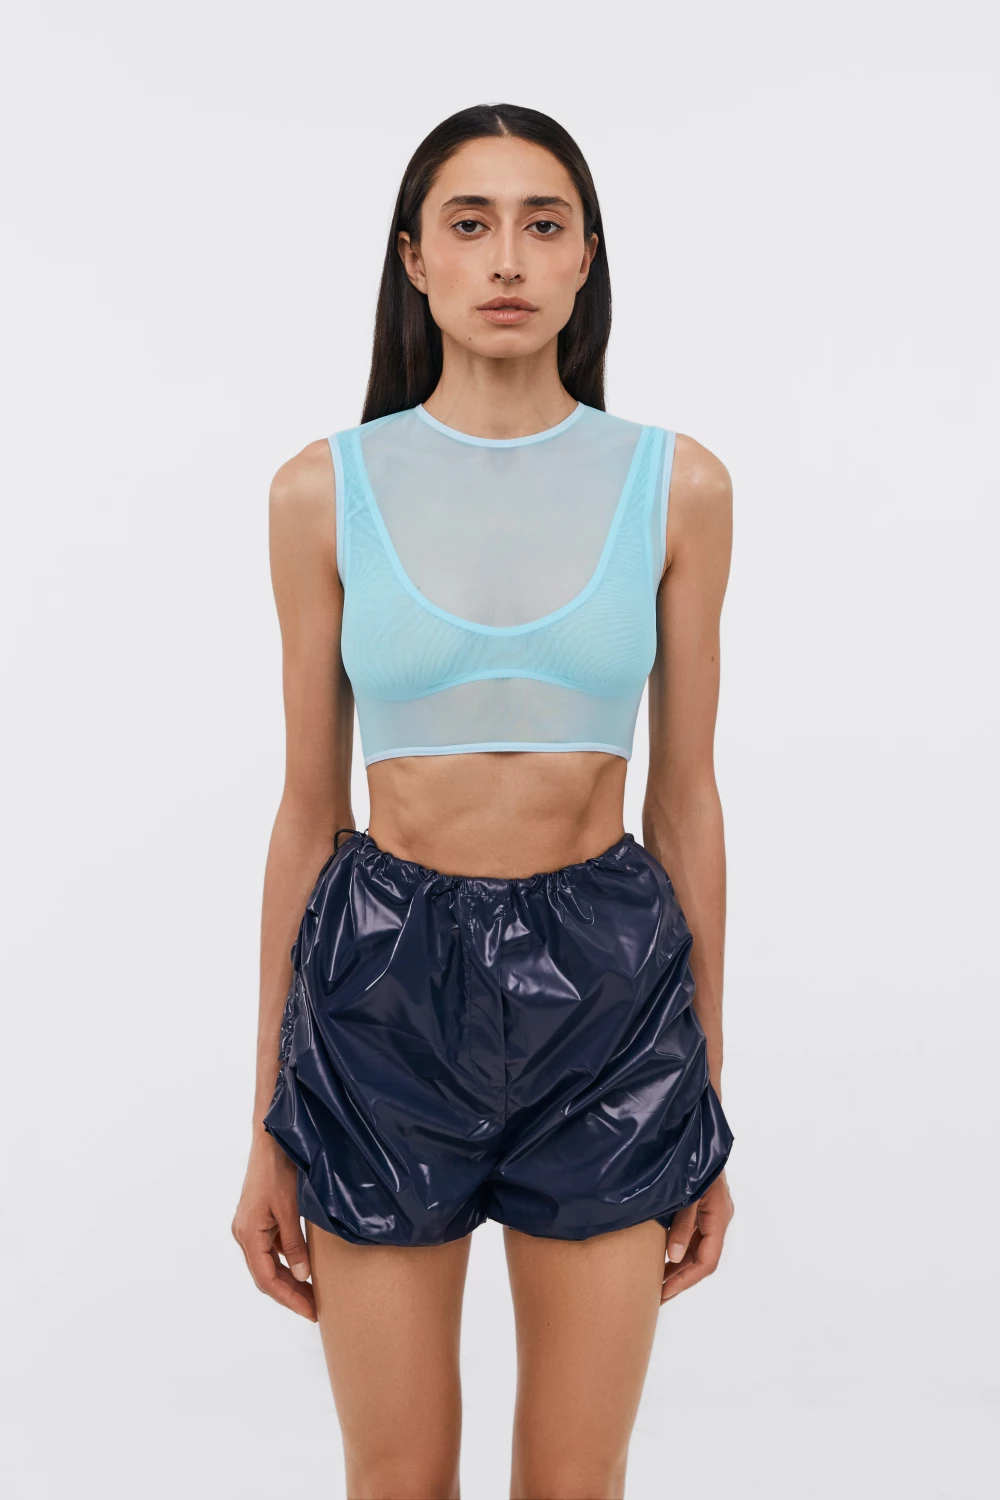 double top "mesh" in blue color